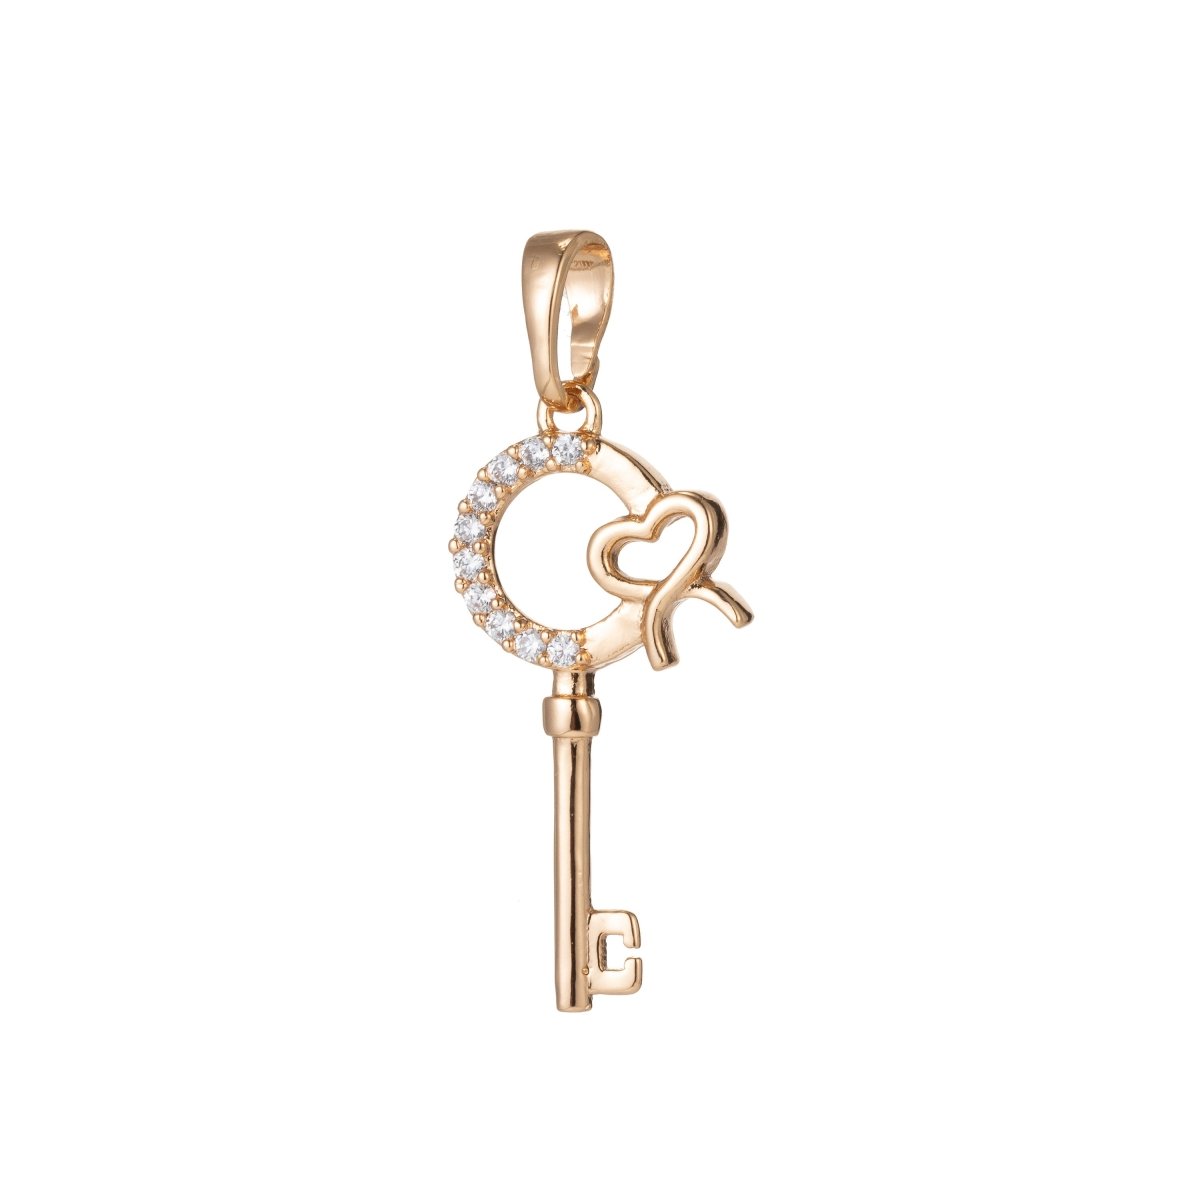 18k Gold Filled Micro Pave CZ Heart Key Pendant Charm, Micro Pave CZ Key Pendant Charm, Gold Filled Key Pendant, For DIY Jewelry I-538 - DLUXCA